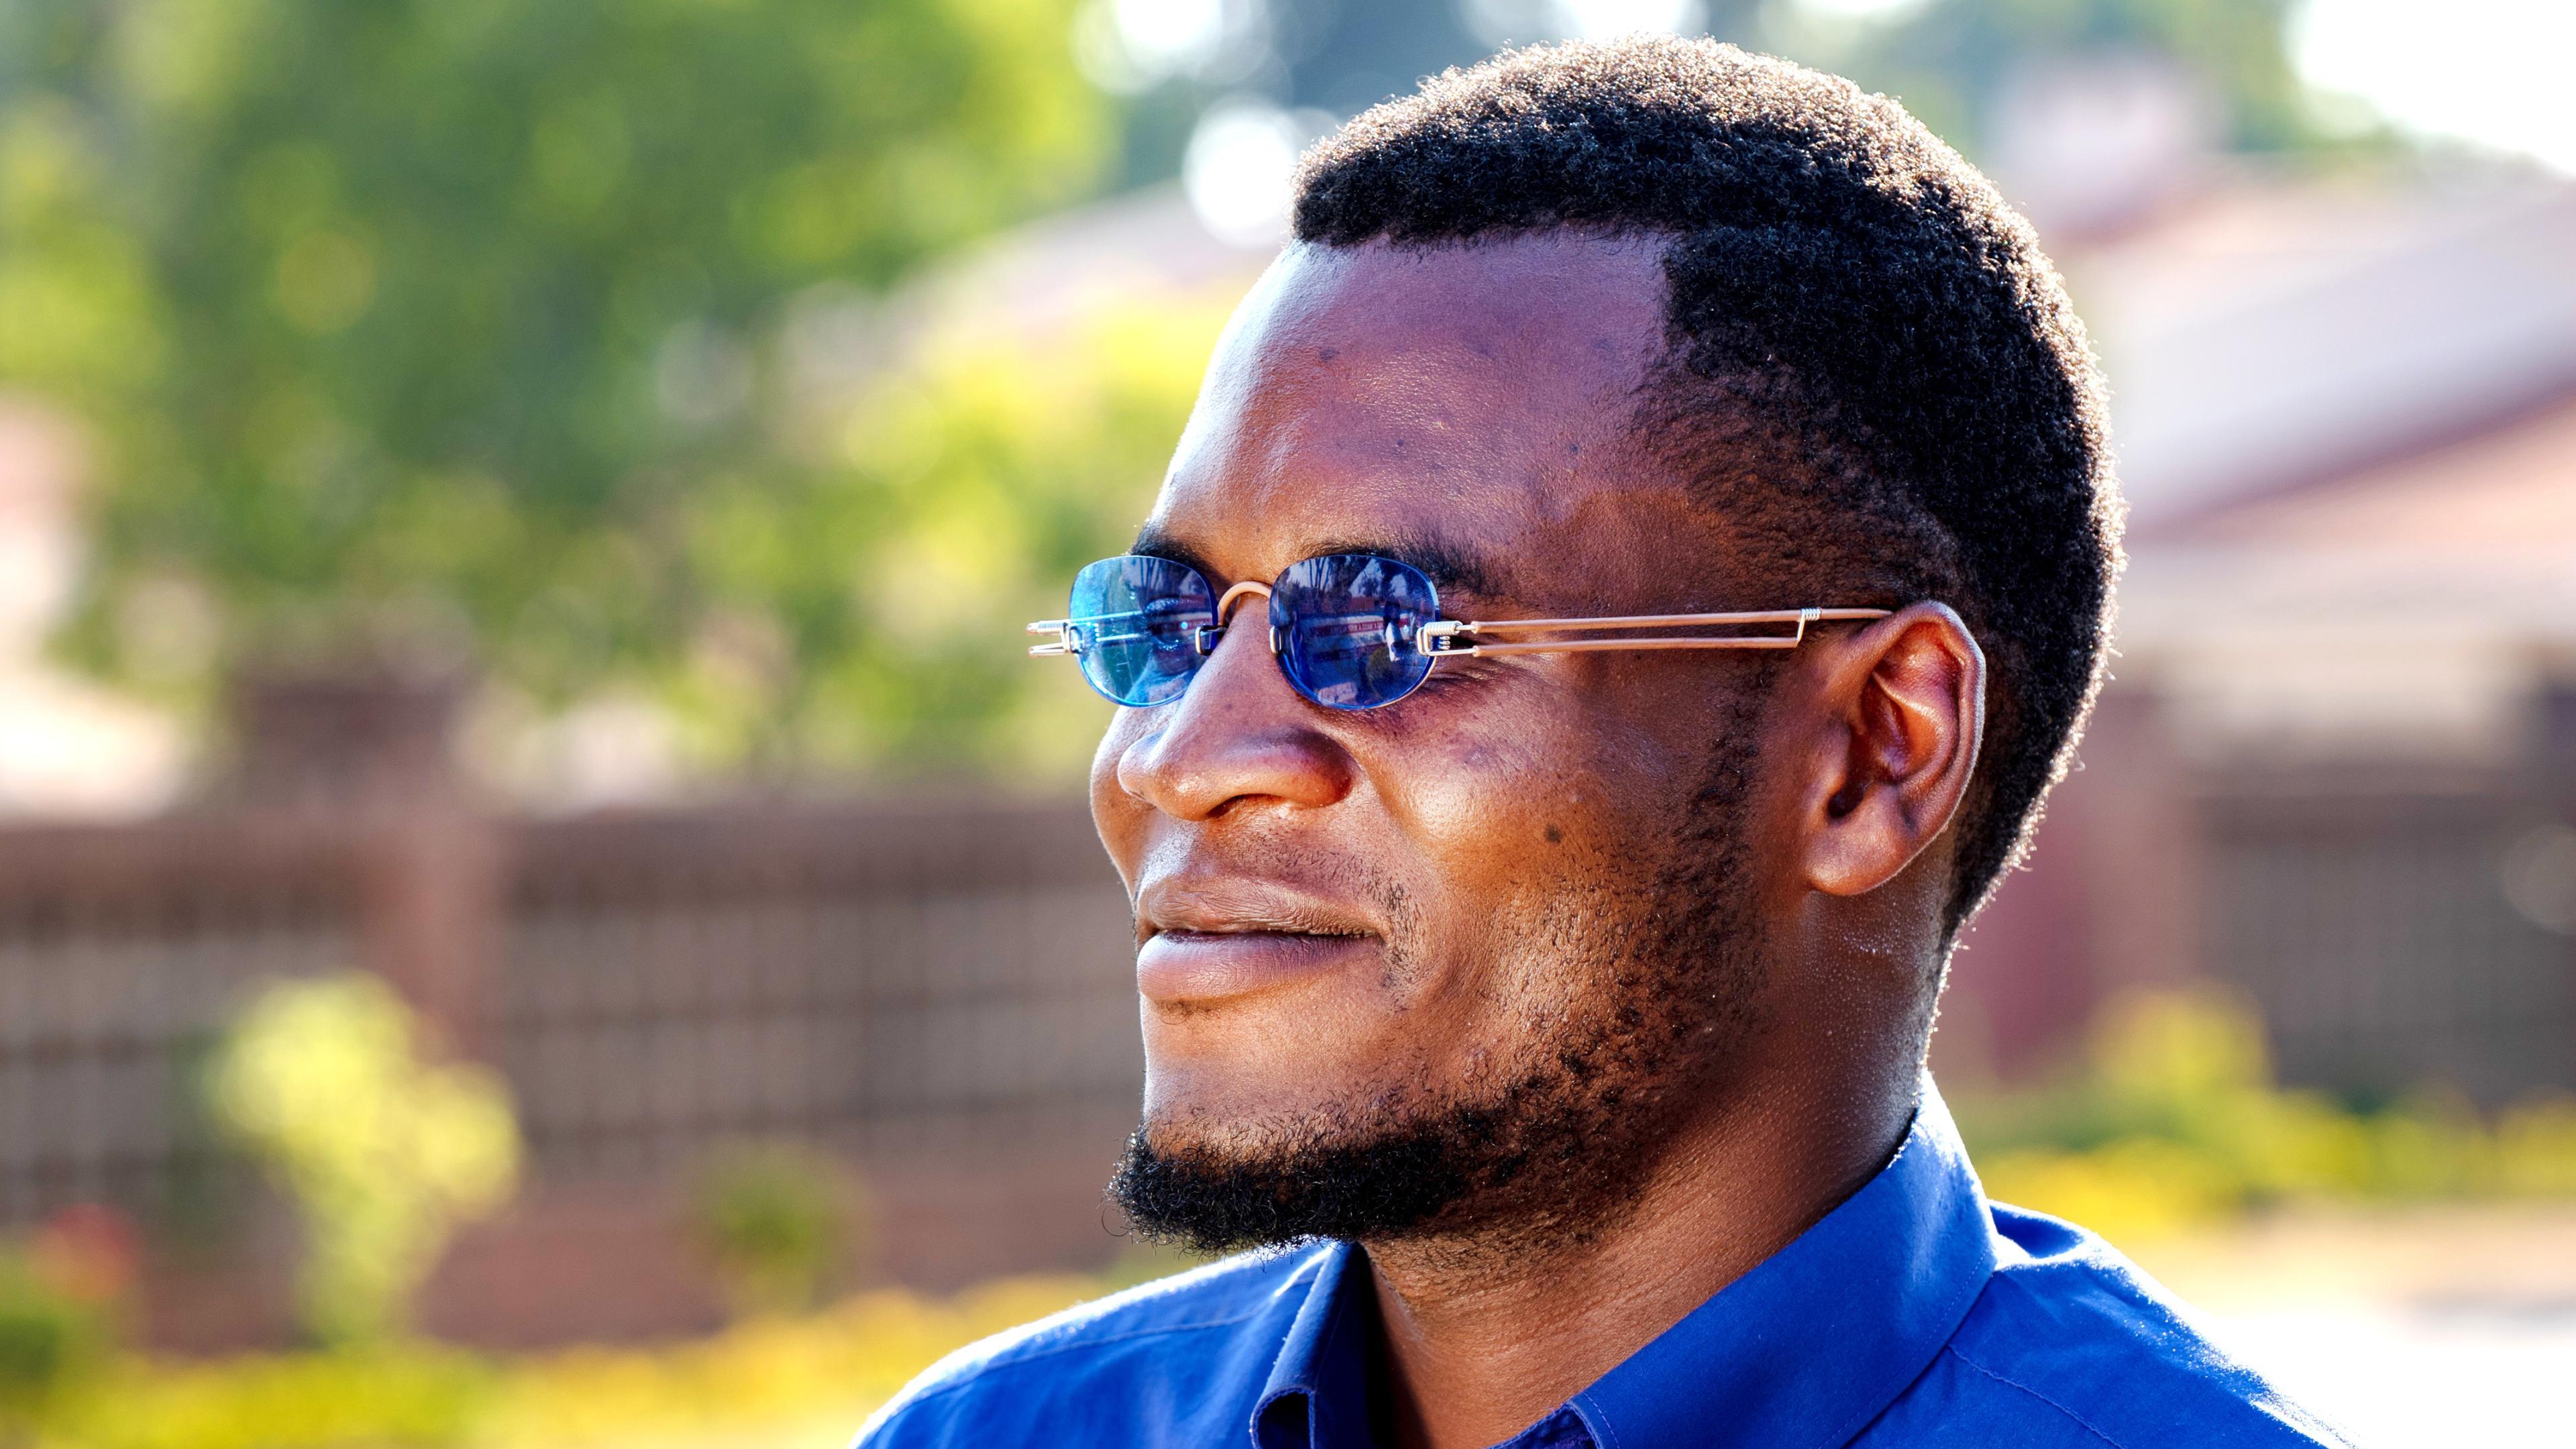 Malawian man with GoodVision Glasses Sunglasses with large lenses